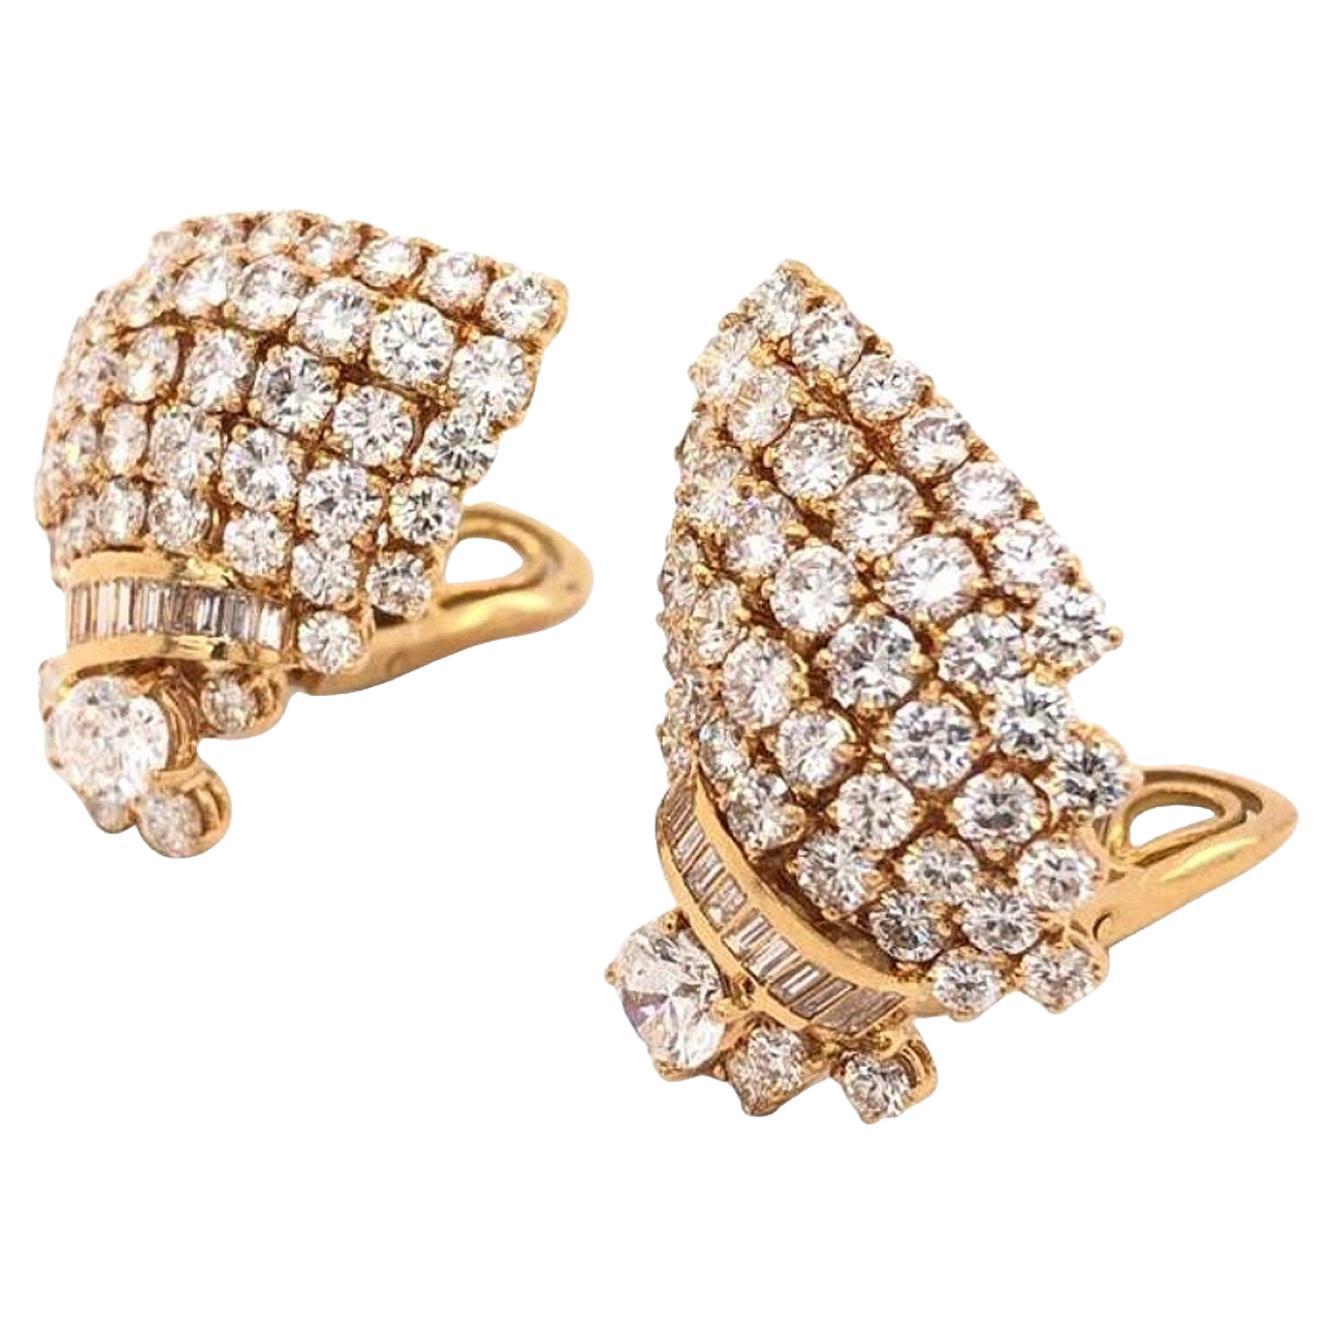 7ct Natural Round Diamonds with Baguettes Dressing Clip On Earrings 18K Gold